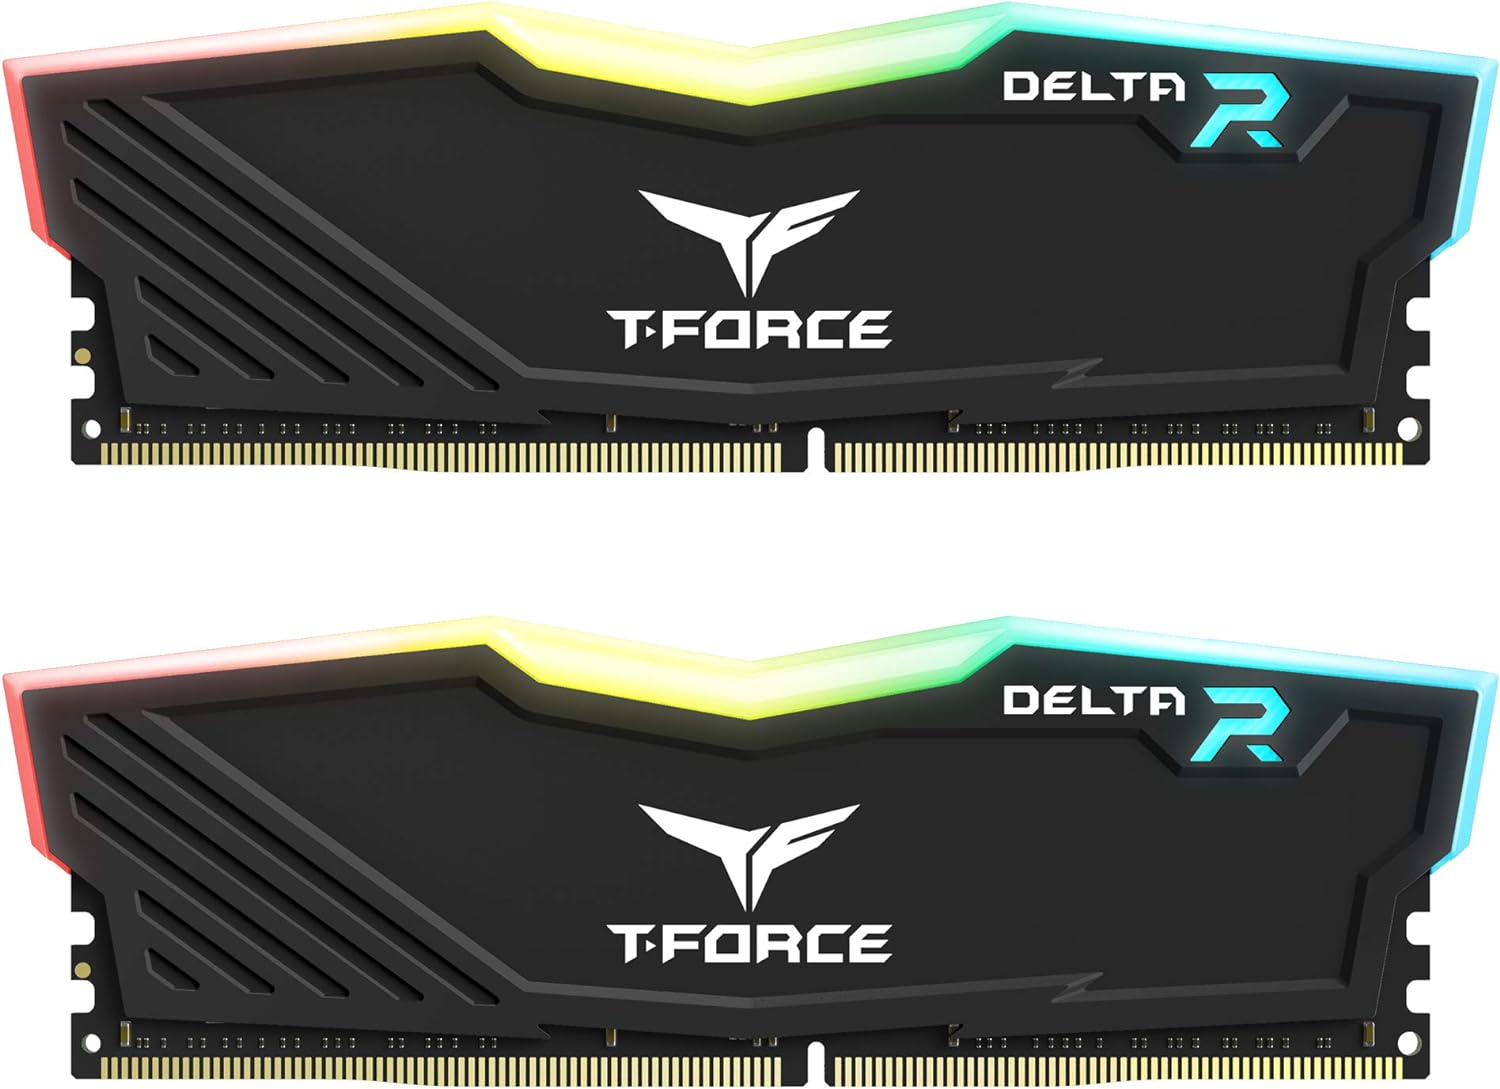 Team T-Force Delta RGB DDR4 Gaming Memory - Full frame 120 degree ultra wide angle lighting. 0765441651777